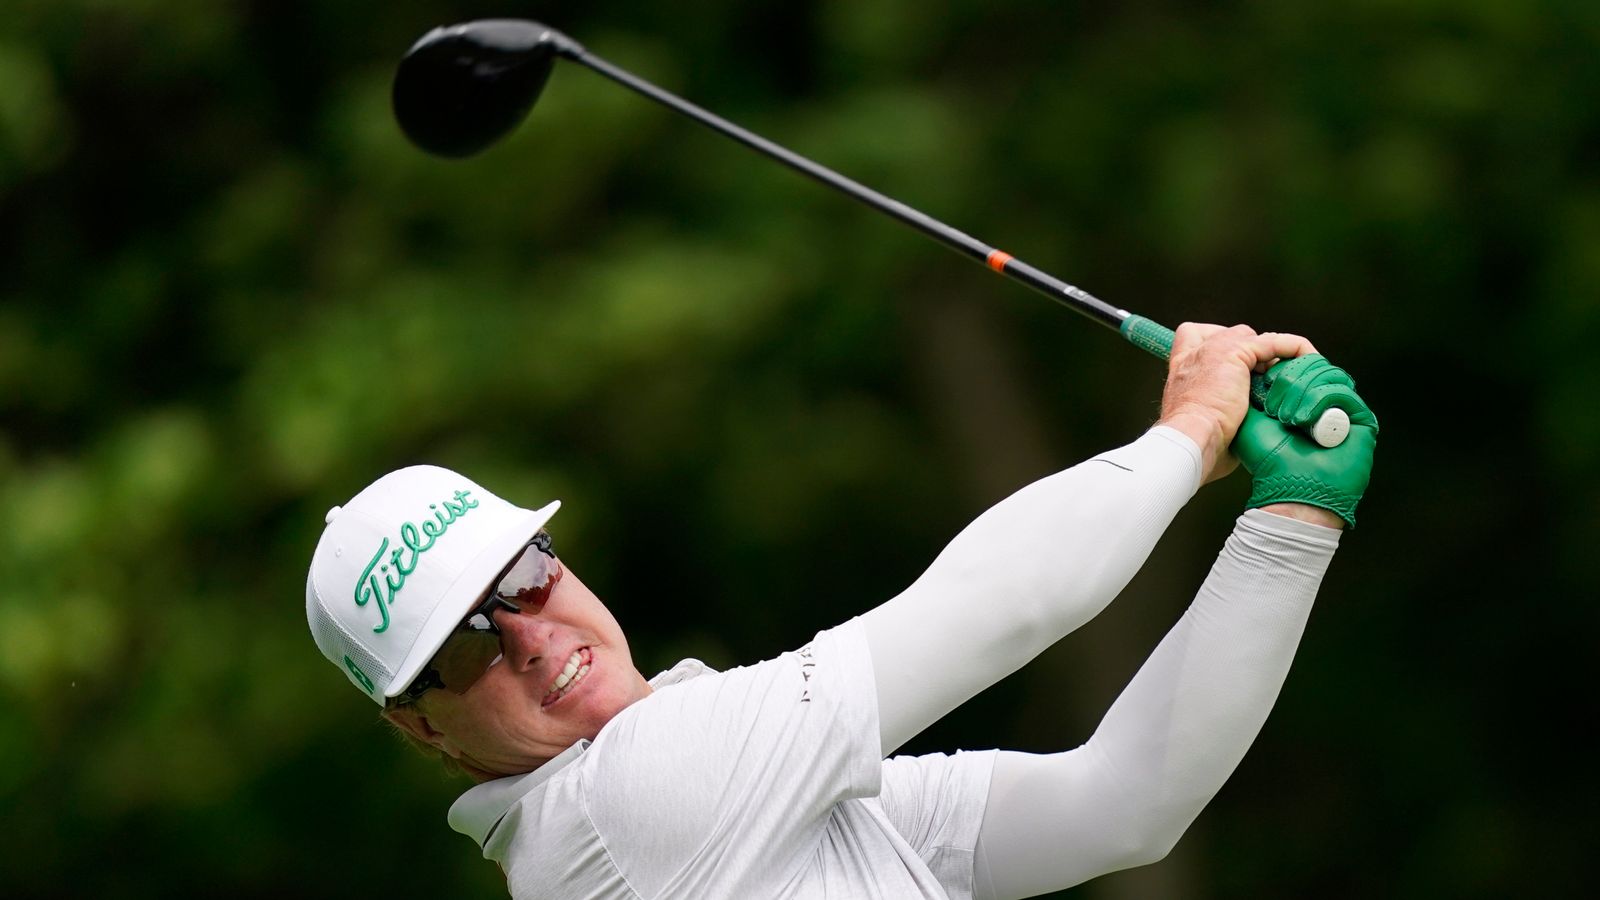 Charley Hoffman and Ryan Palmer lead PGA Tour’s QBE Shootout after first round